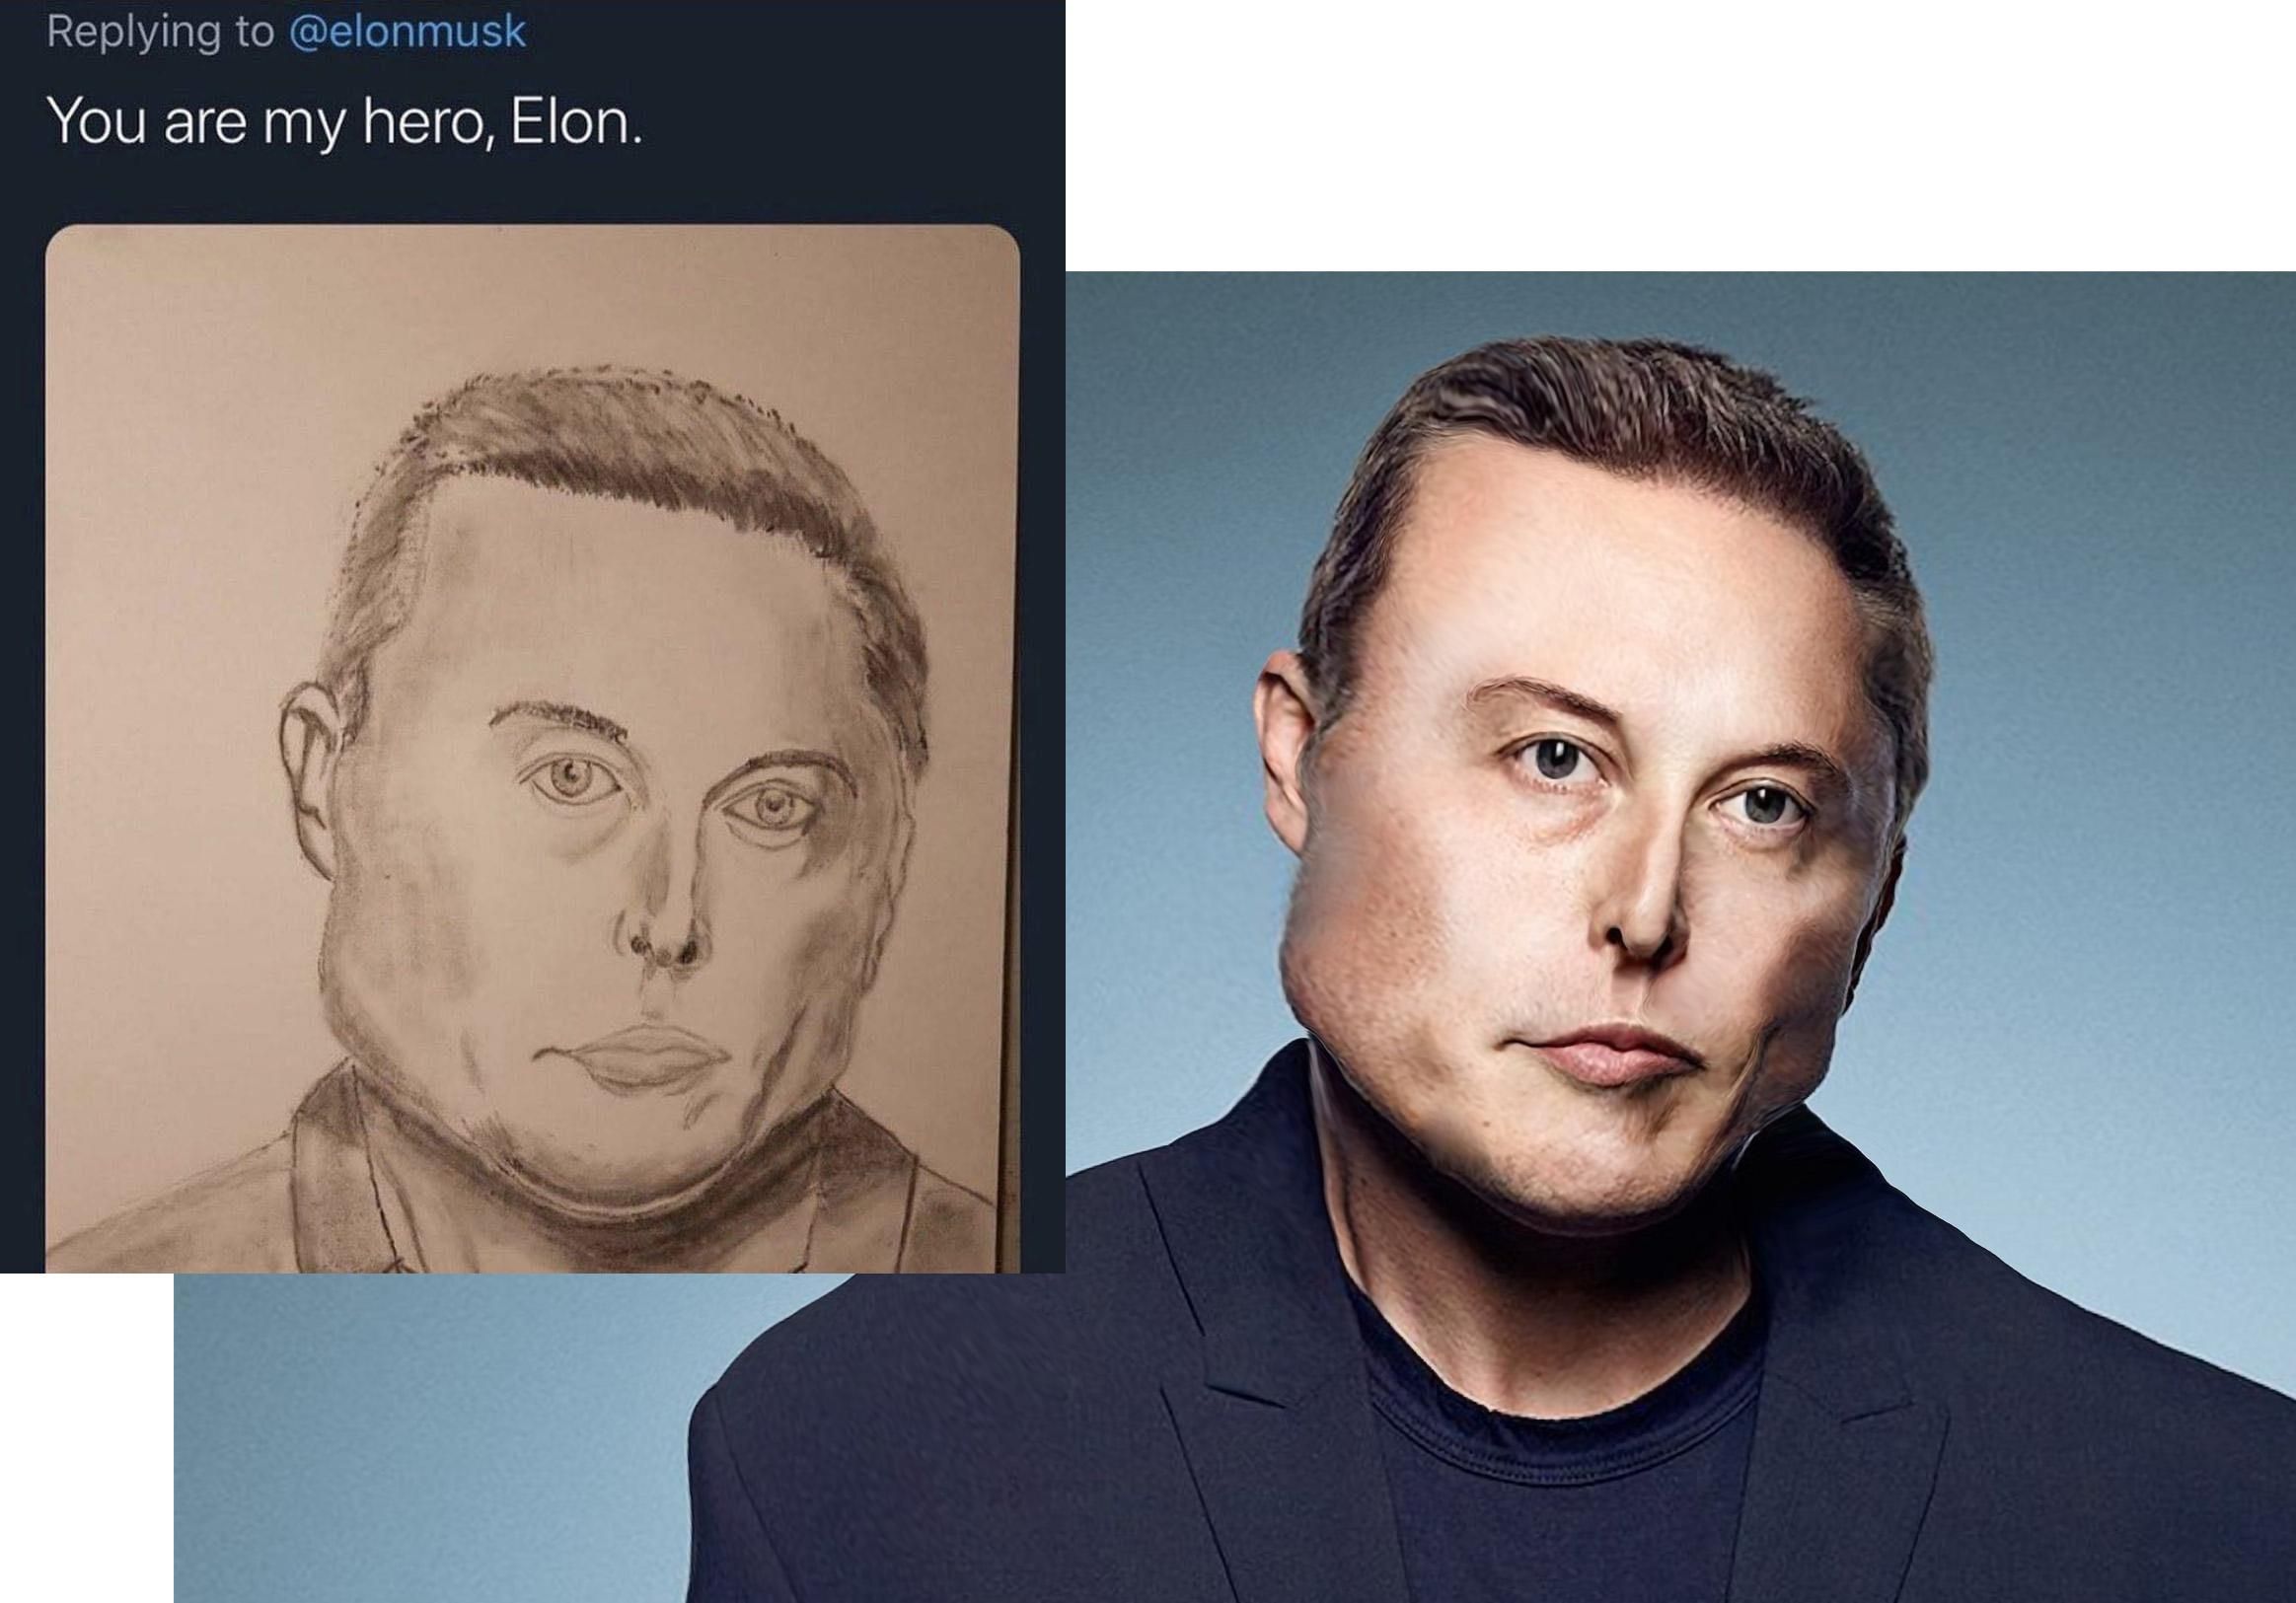 I made that one guy's Elon Musk drawing come to life in photoshop.